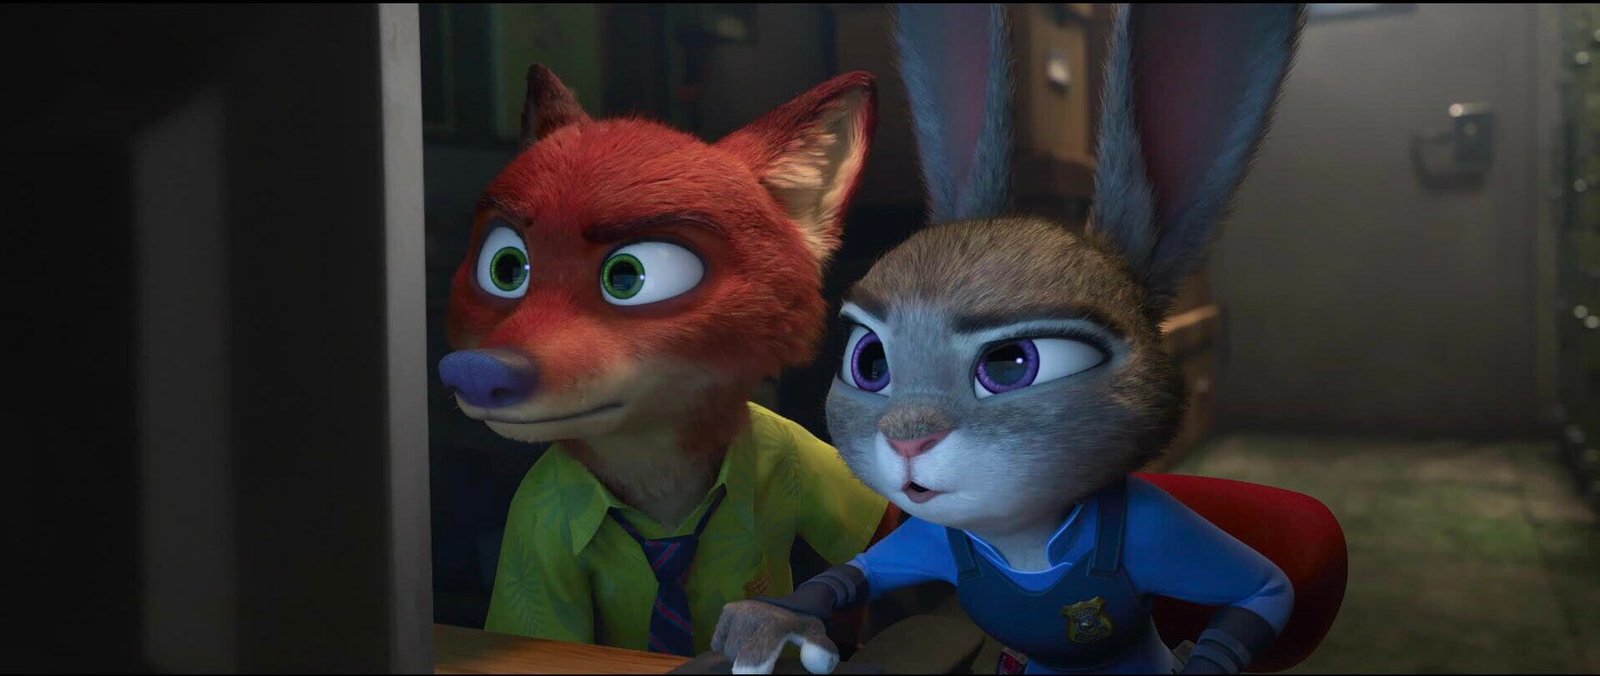 Zootopia 2' Is Happening! Release Date Predictions, Cast, & More